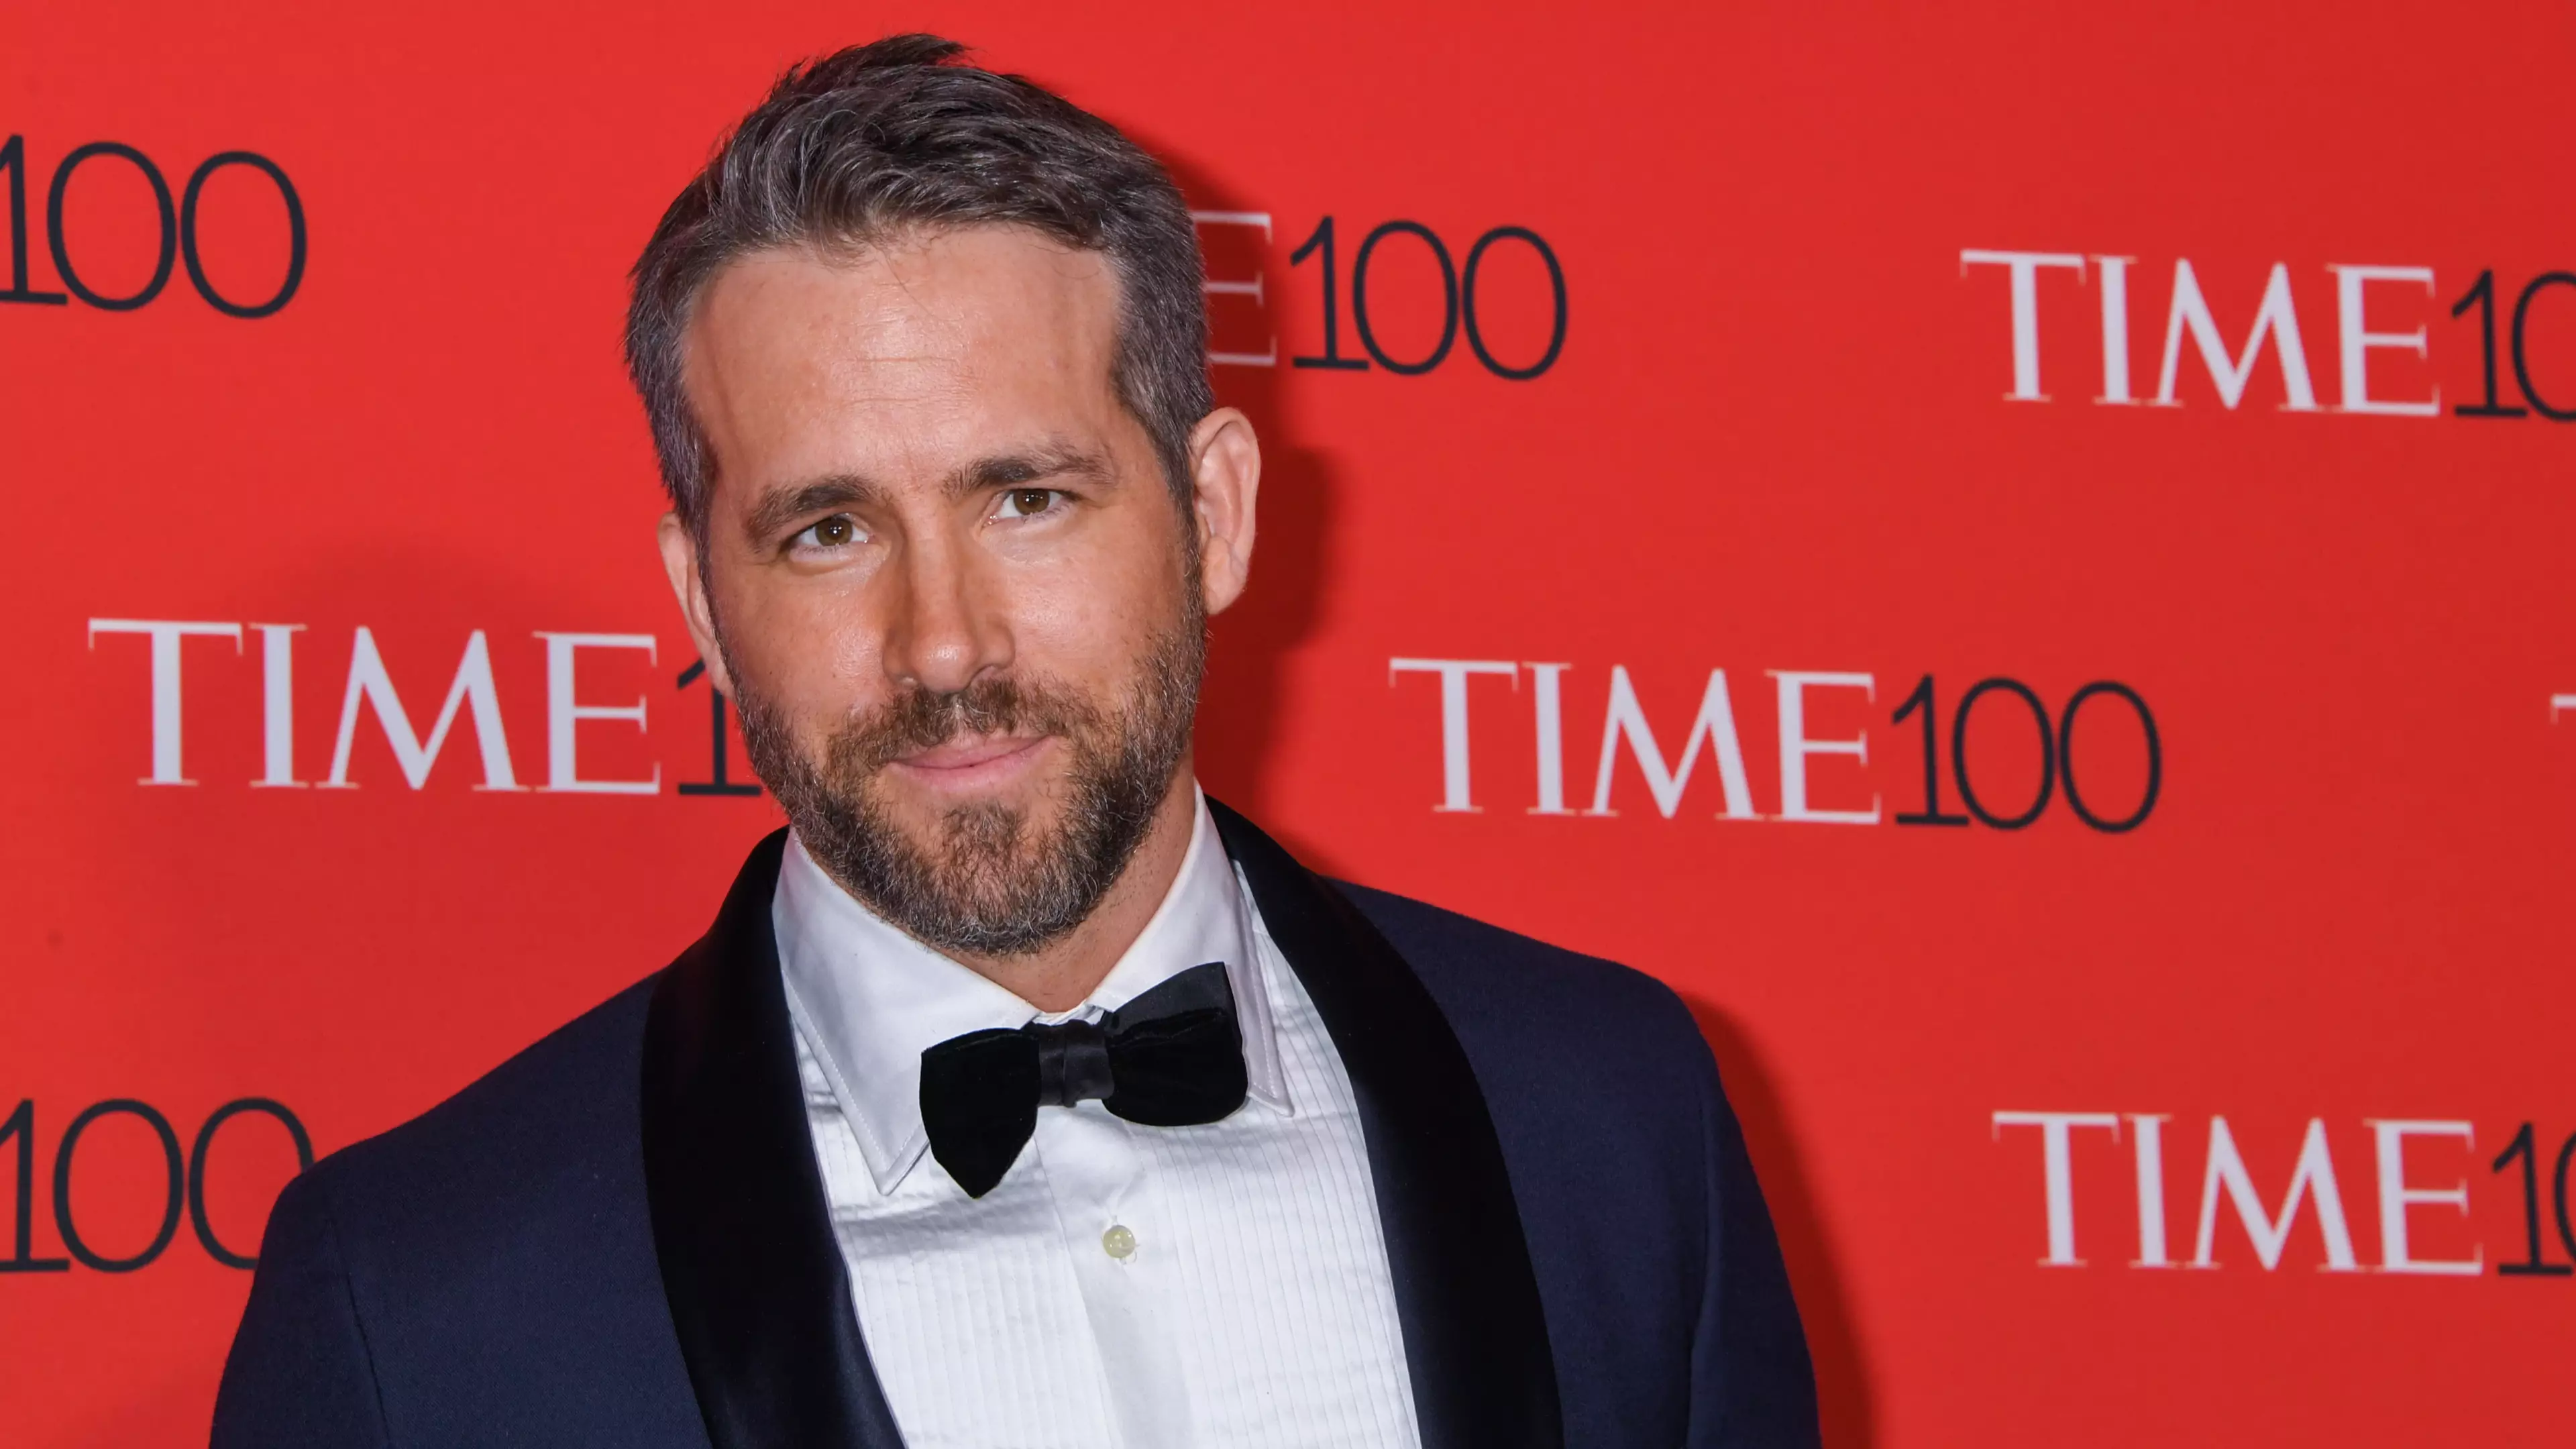 Ryan Reynolds Fulfils Dying Boy's Wish As The Pair Facetime 